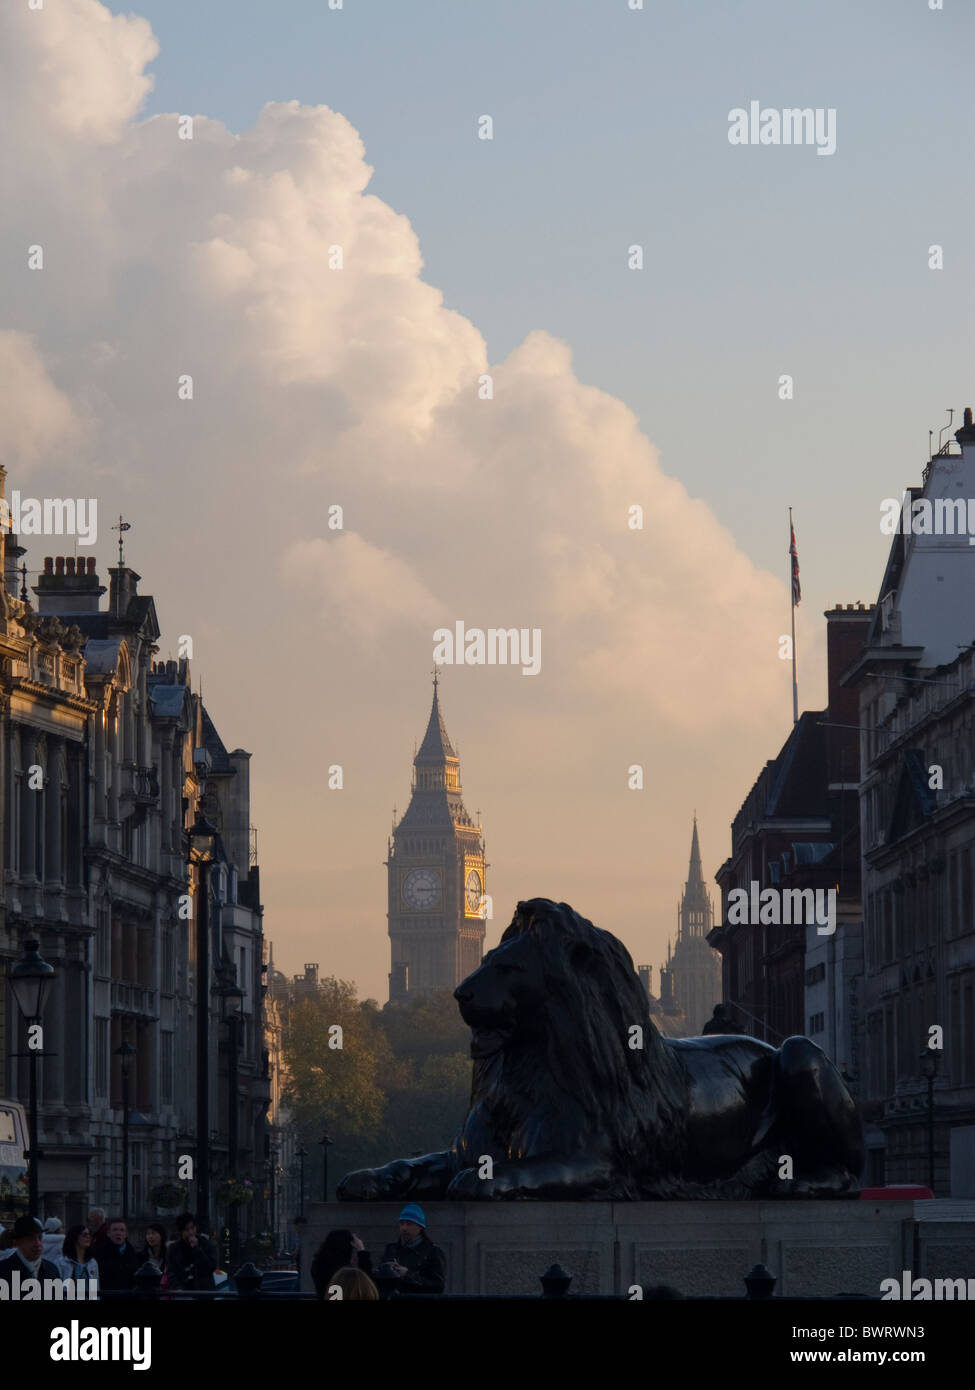 A view of Big Ben looking past one of the lions in Trafalgar Sq, London Stock Photo